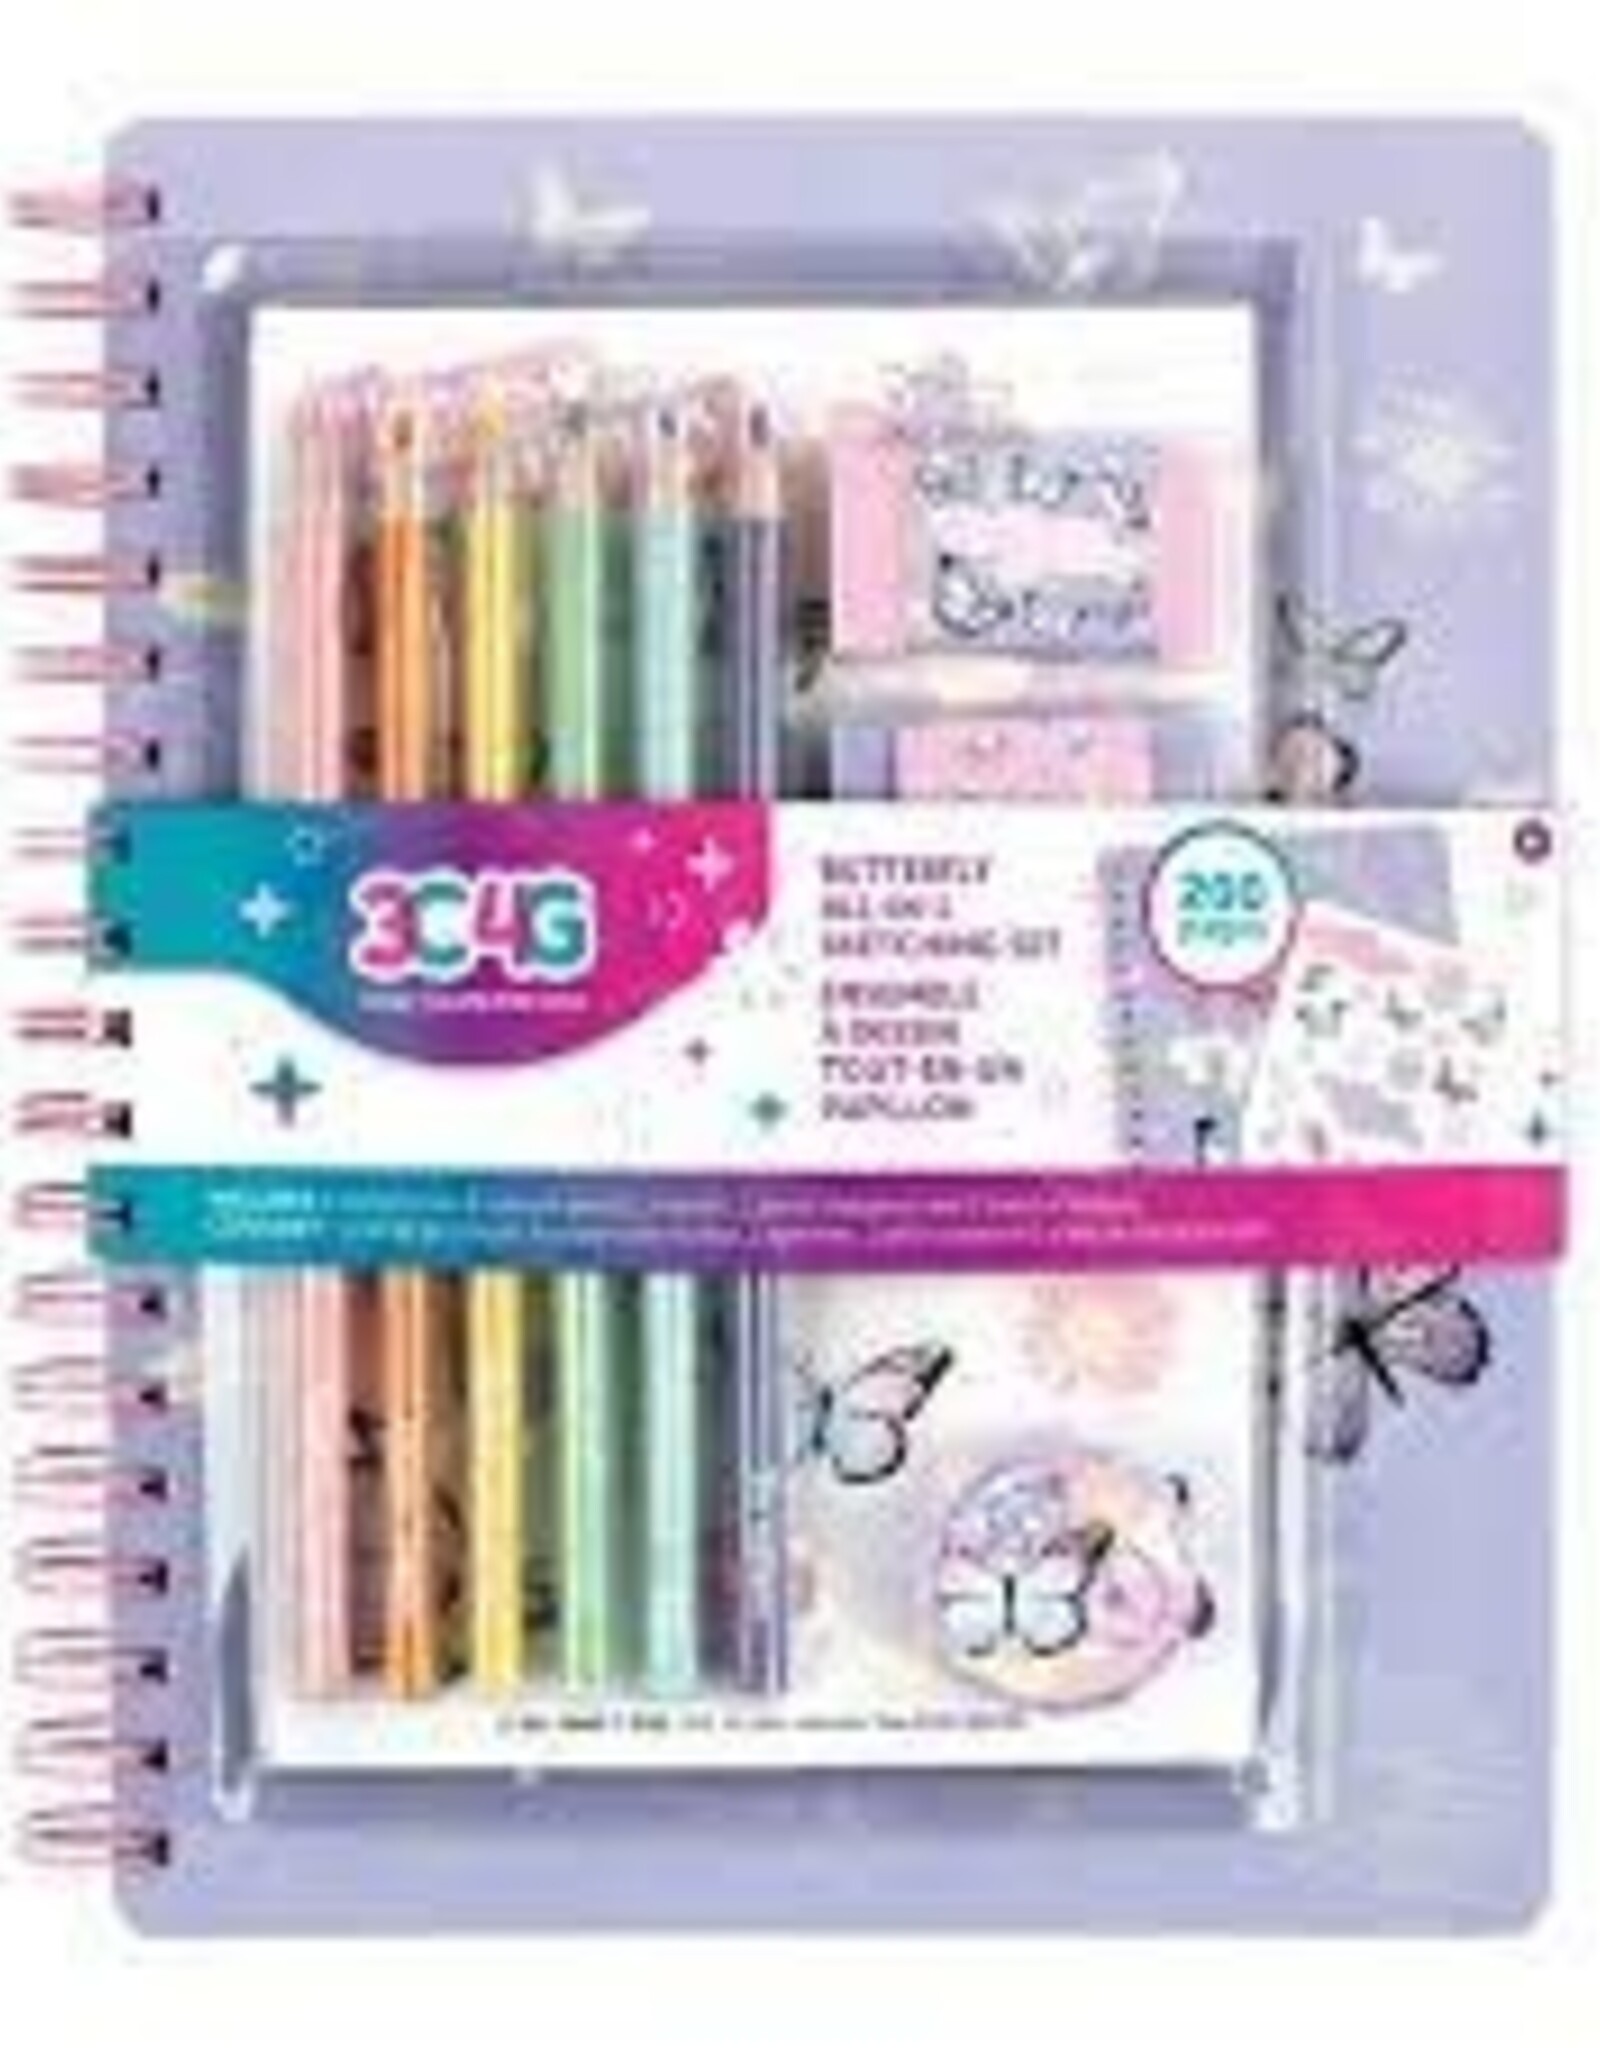 Make It Real 3C4G Butterfly All-In-1 Sketching Set